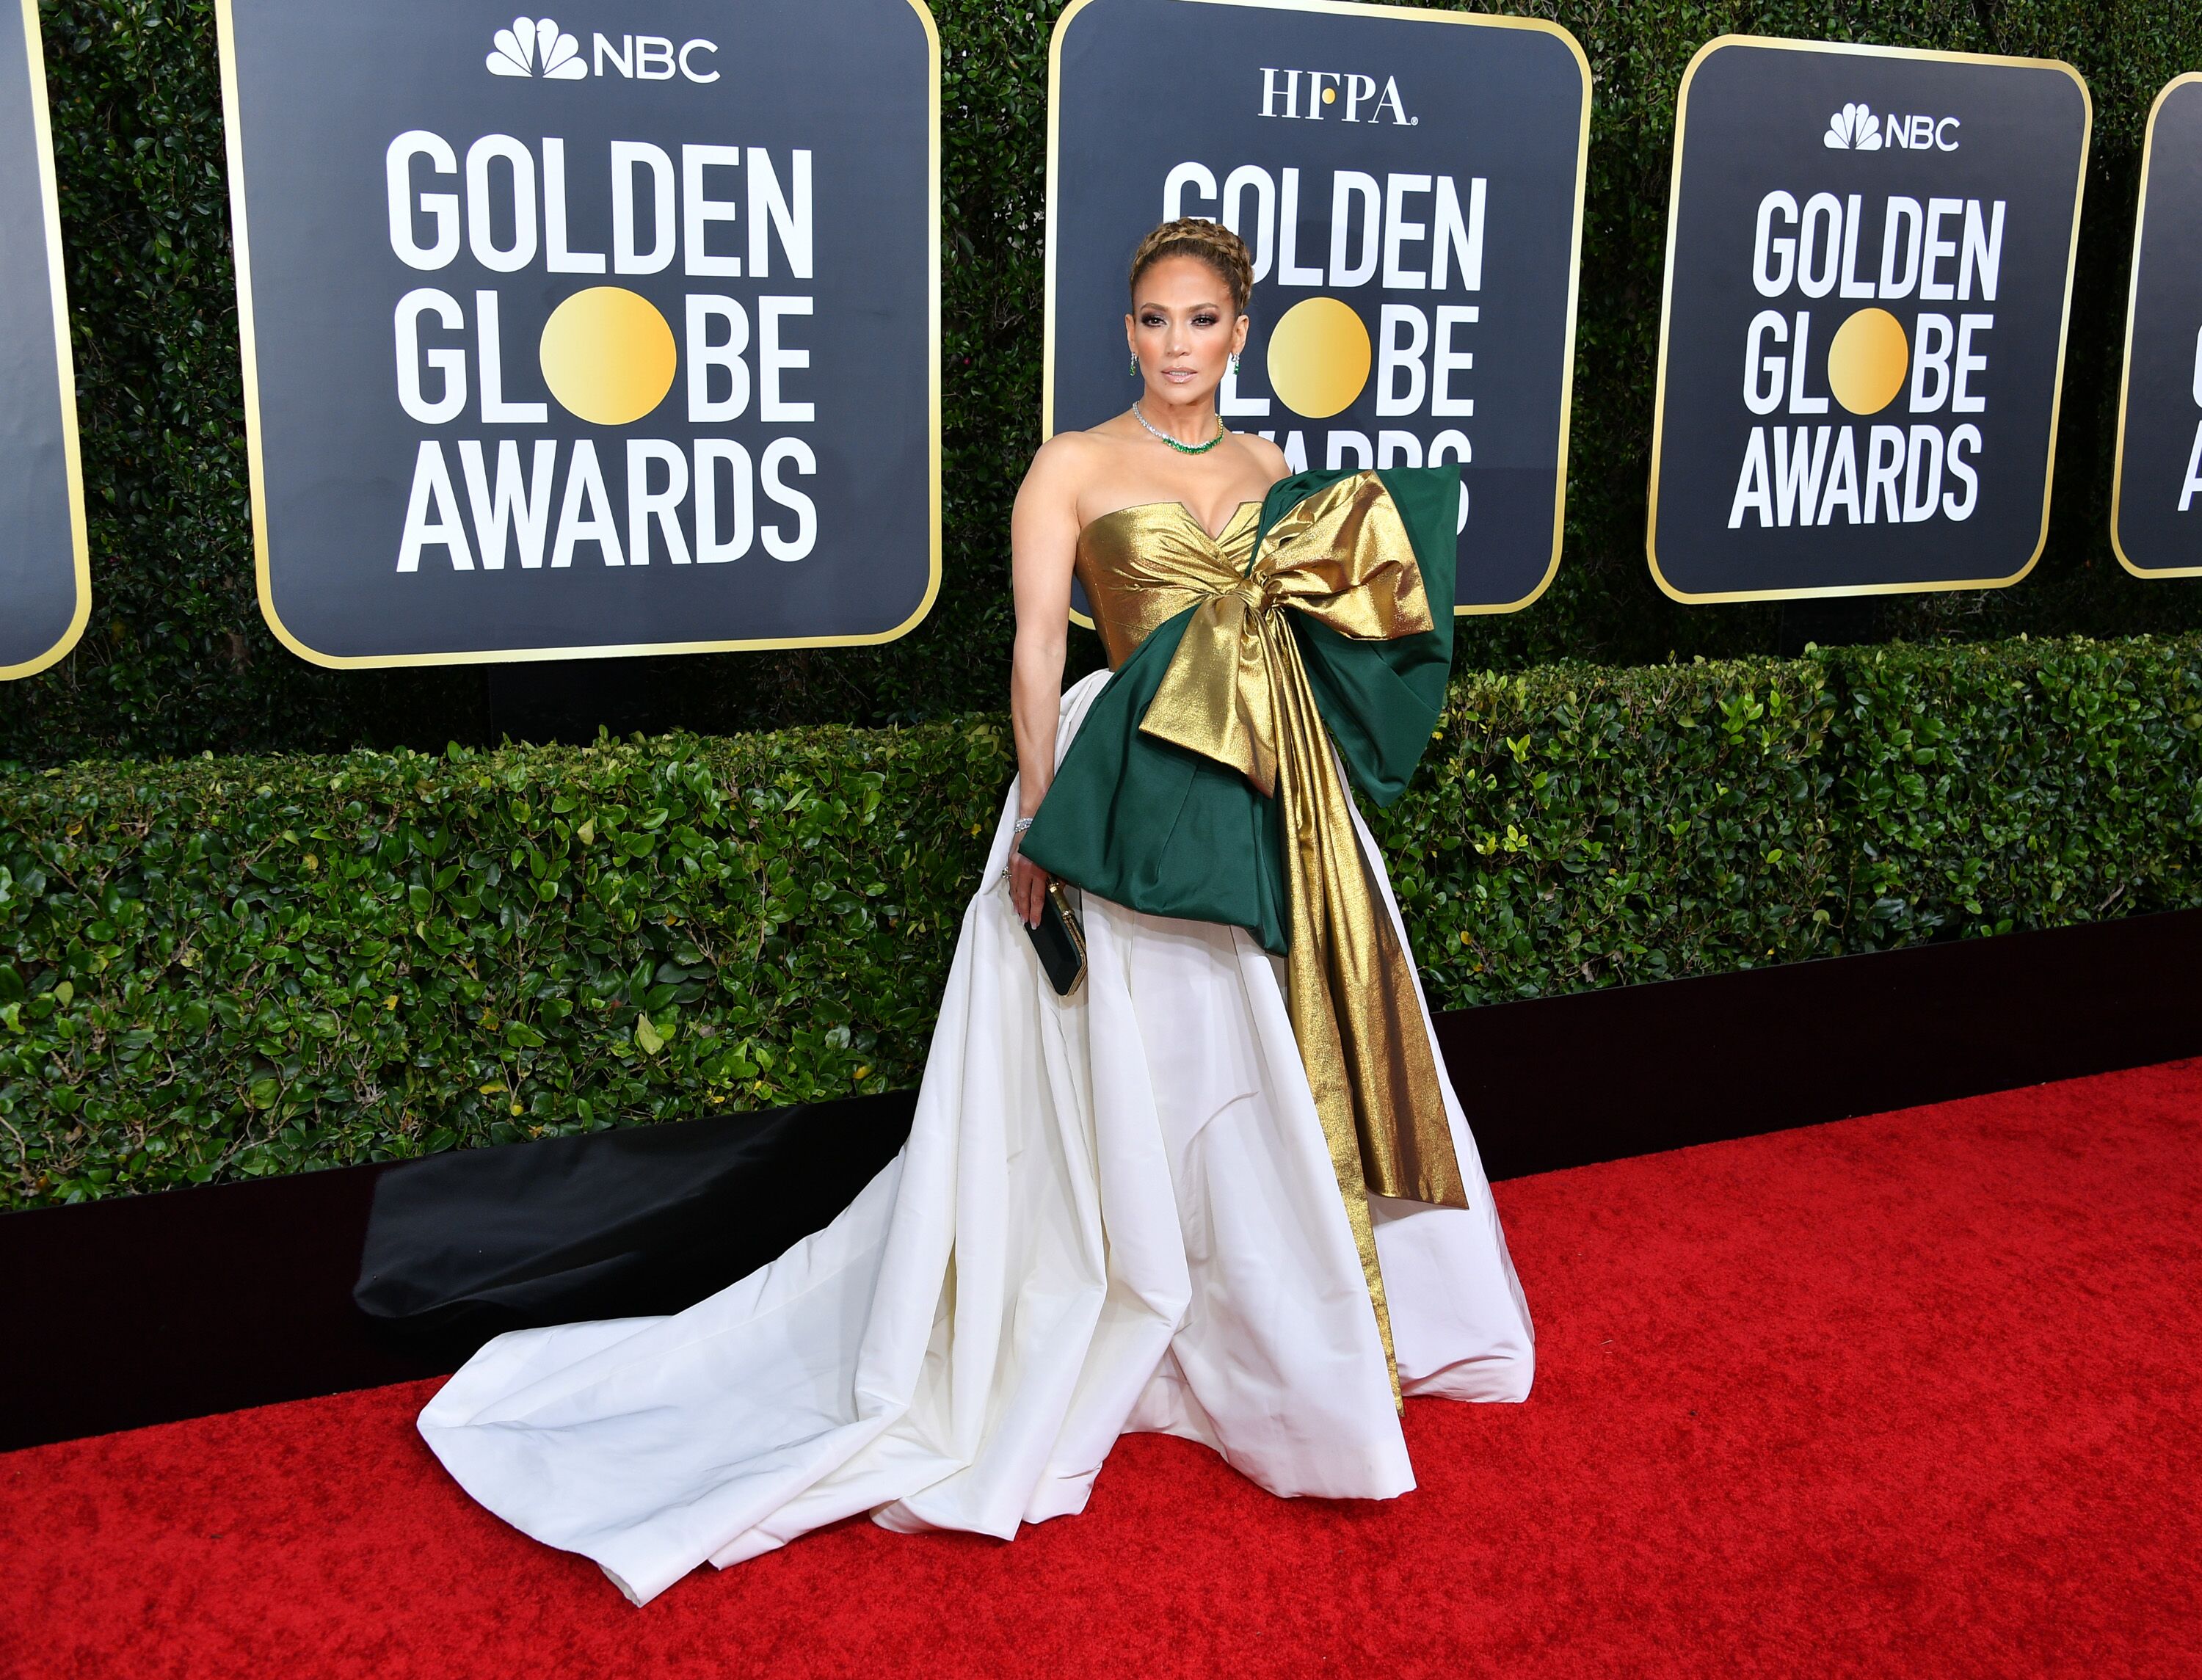 Jennifer Lopez at the 77th Annual Golden Globe Awards on January 05, 2020. | Photo: Getty Images